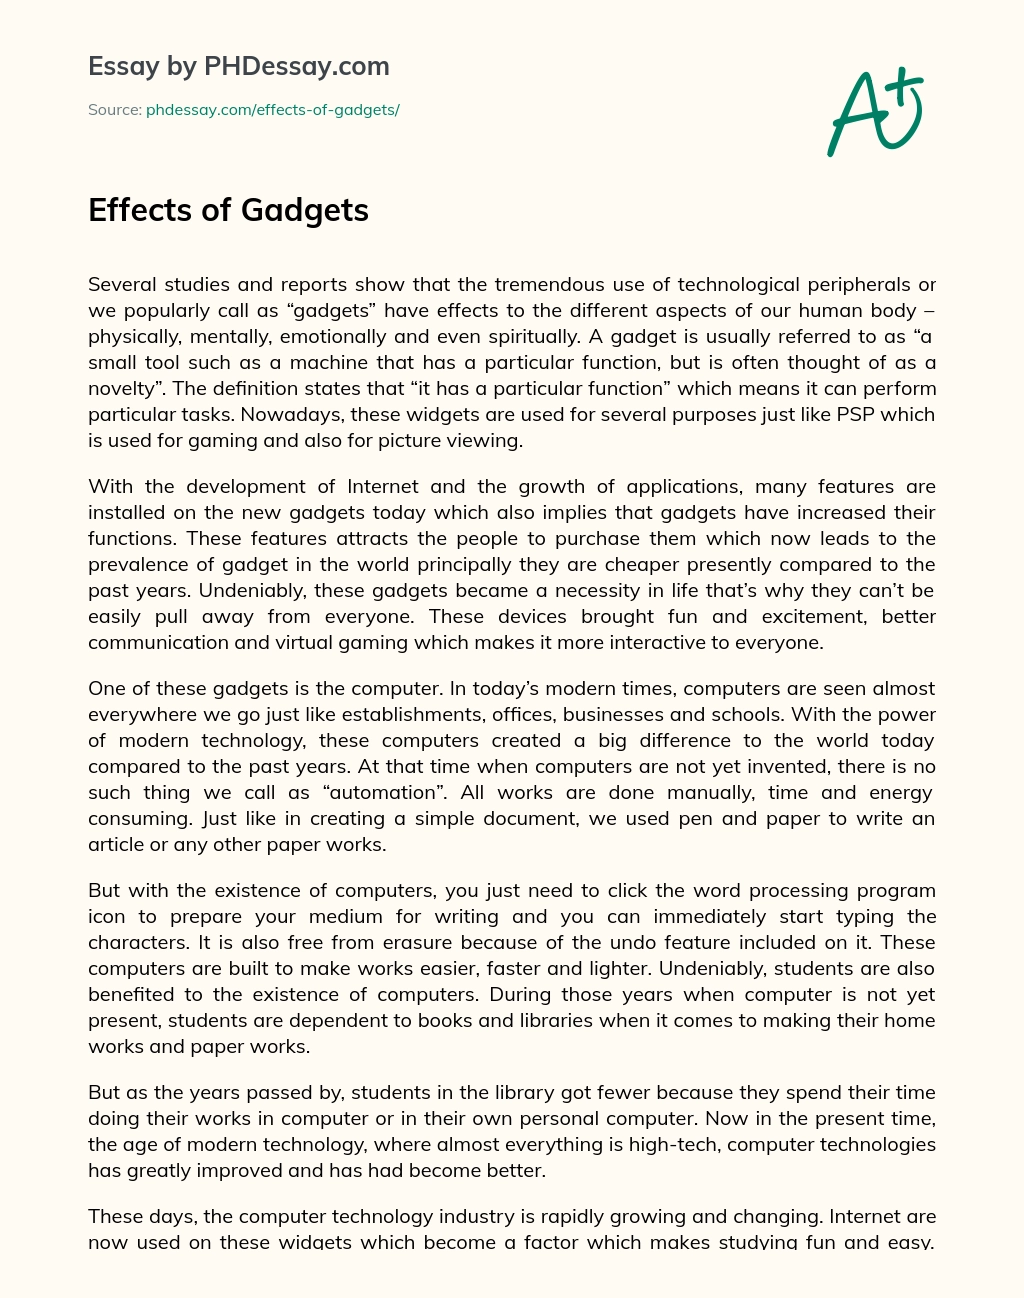 Effects of Gadgets essay